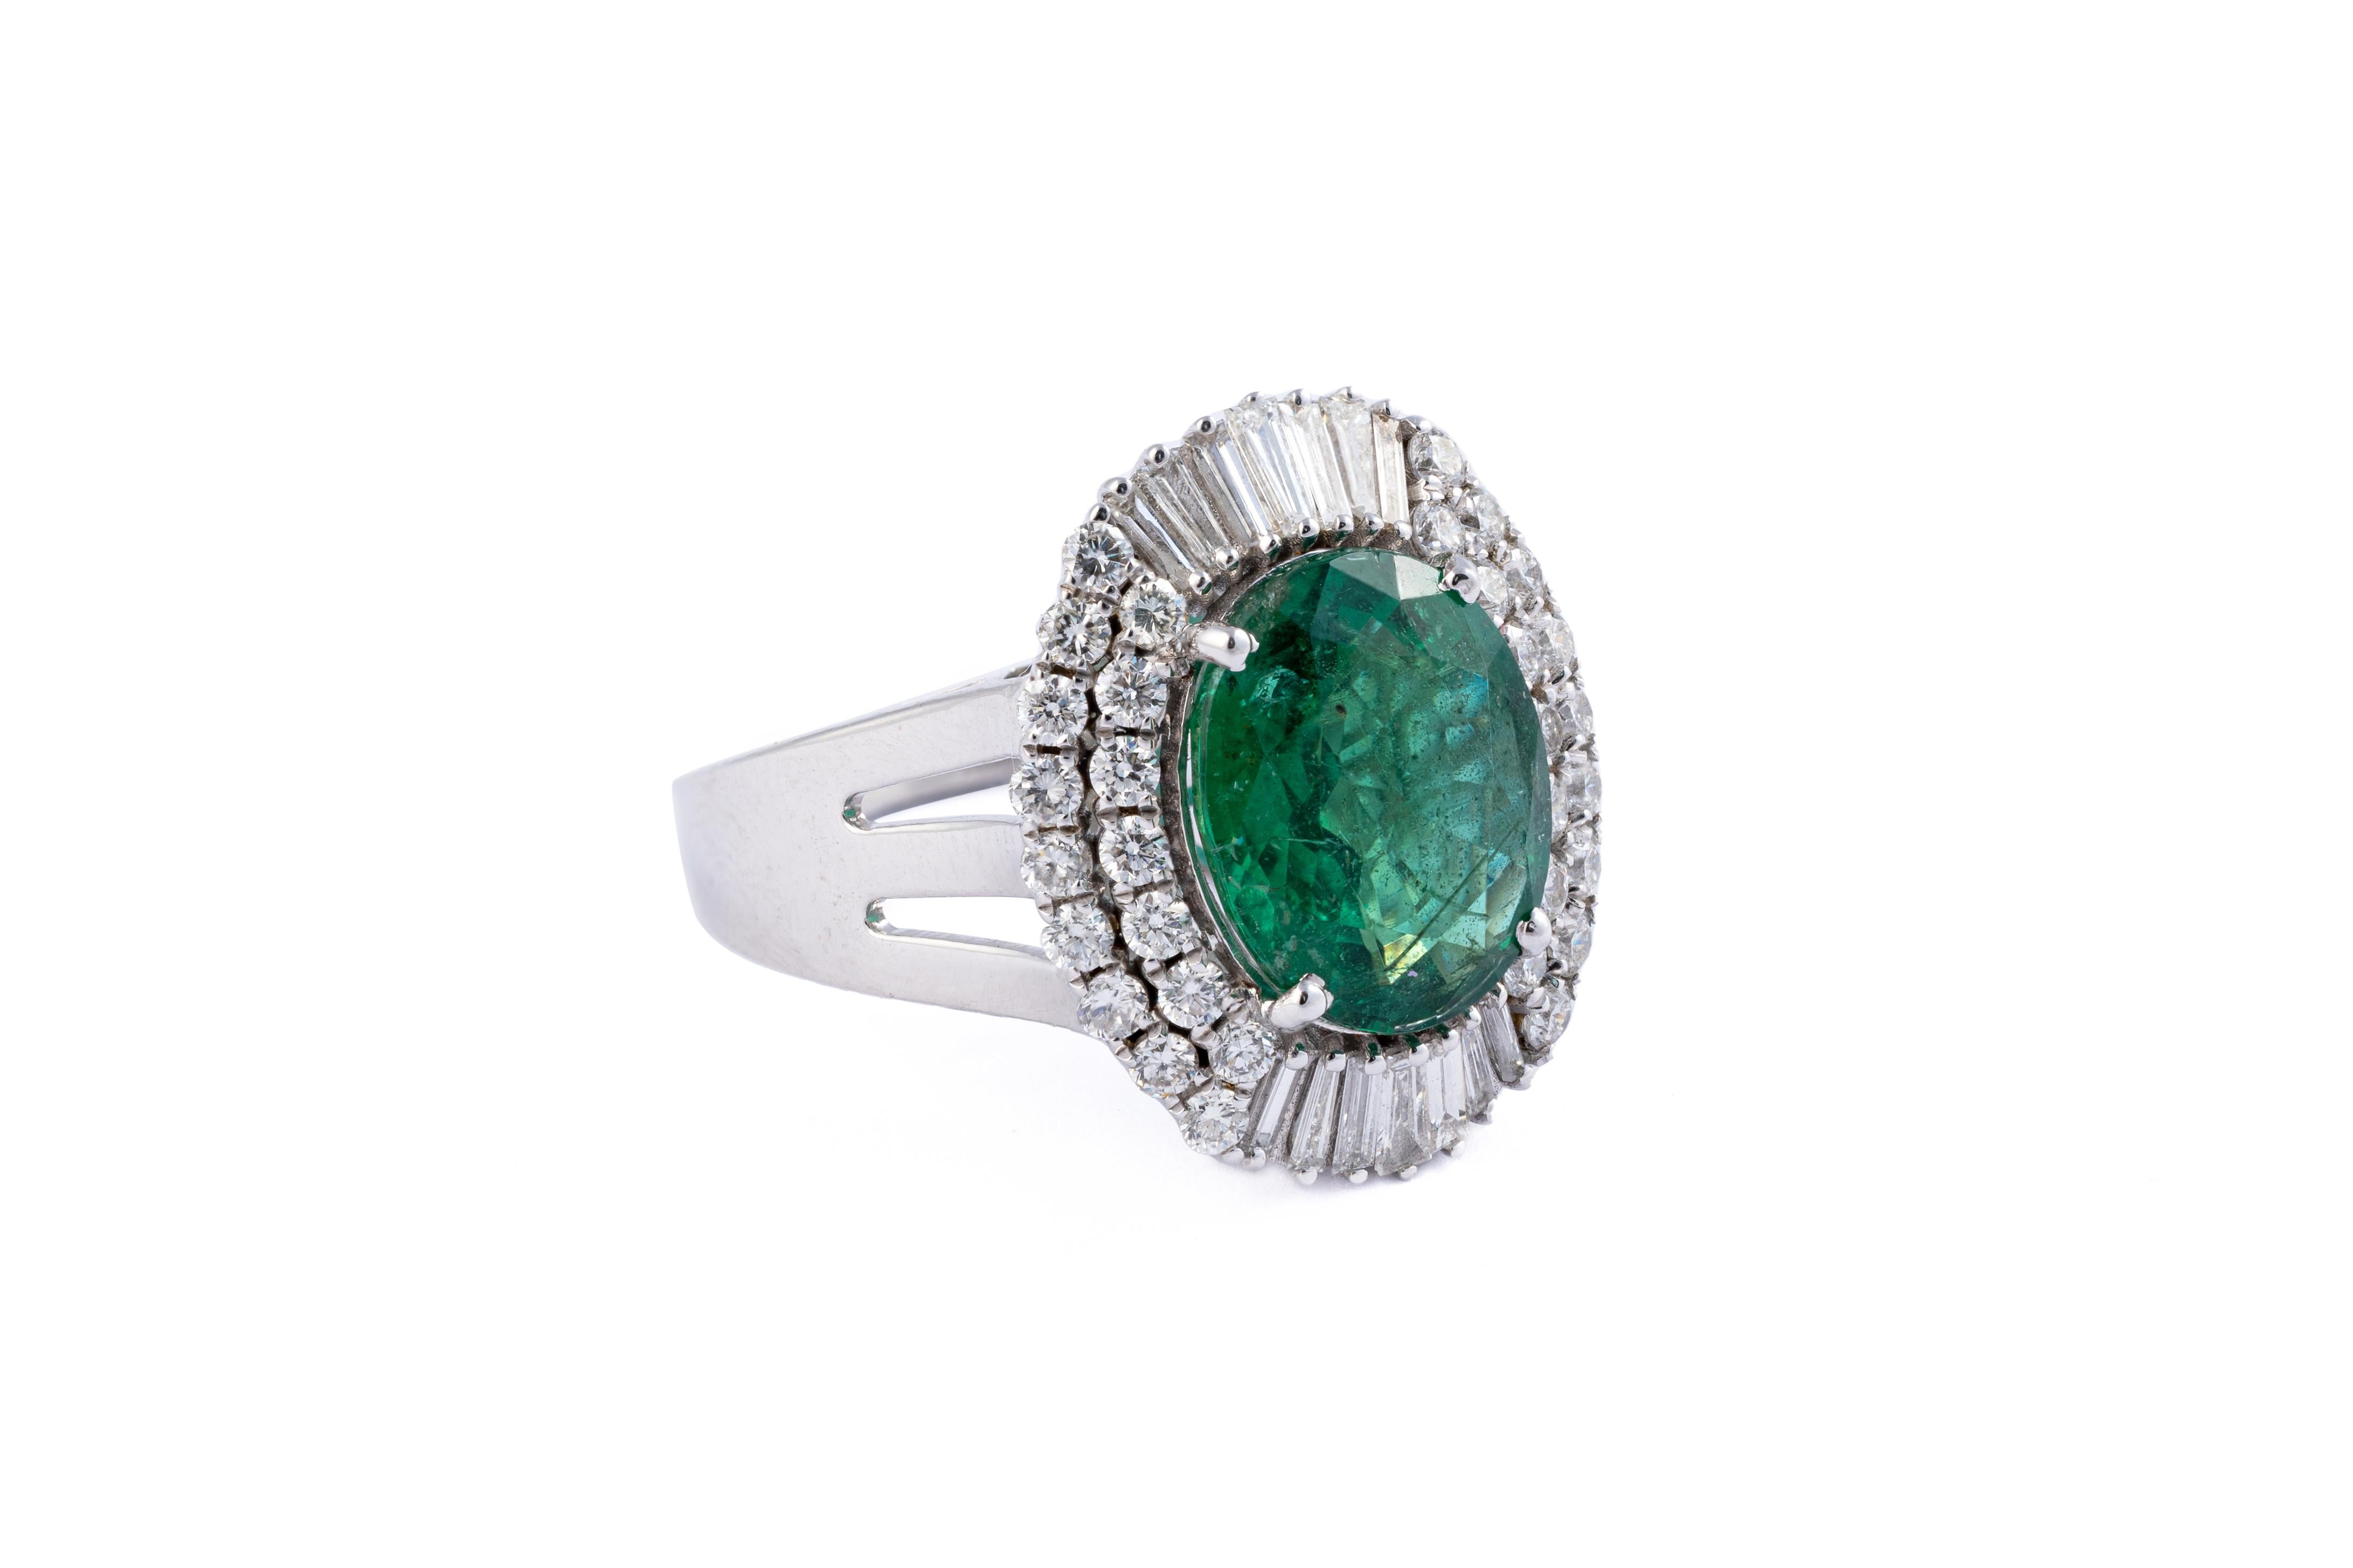 This is a natural Zambian Emerald ring with diamonds and 14k gold the emeralds are very high quality and very good quality diamonds the clarity is vsi and G colour 
emeralds : 4.54cts
diamonds : 1.47cts
gold : 7.39 gms
very hard to capture the true